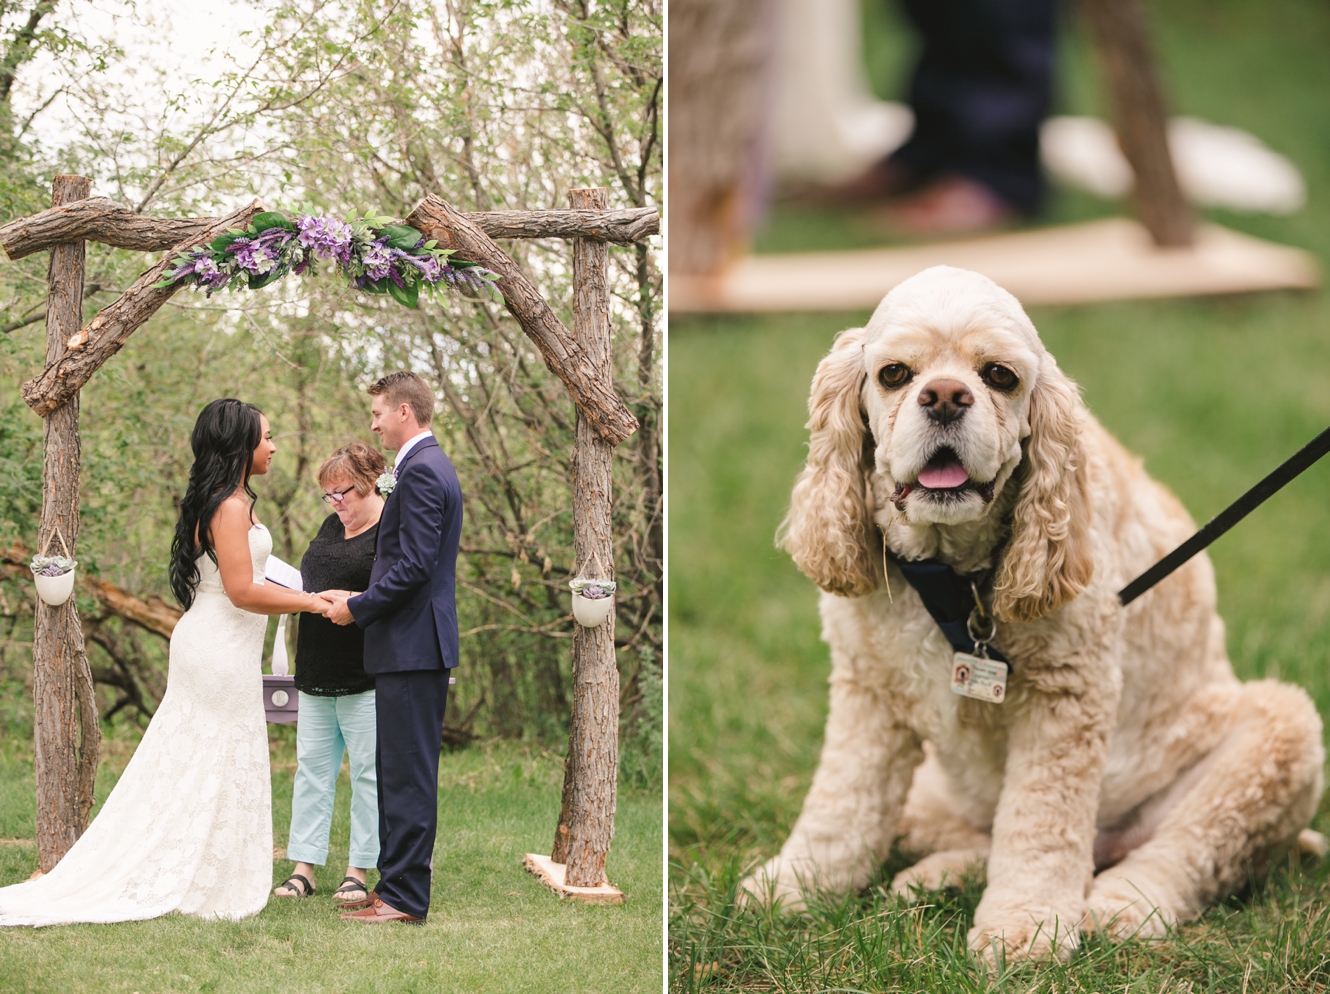 How to include your pet in your wedding day photo